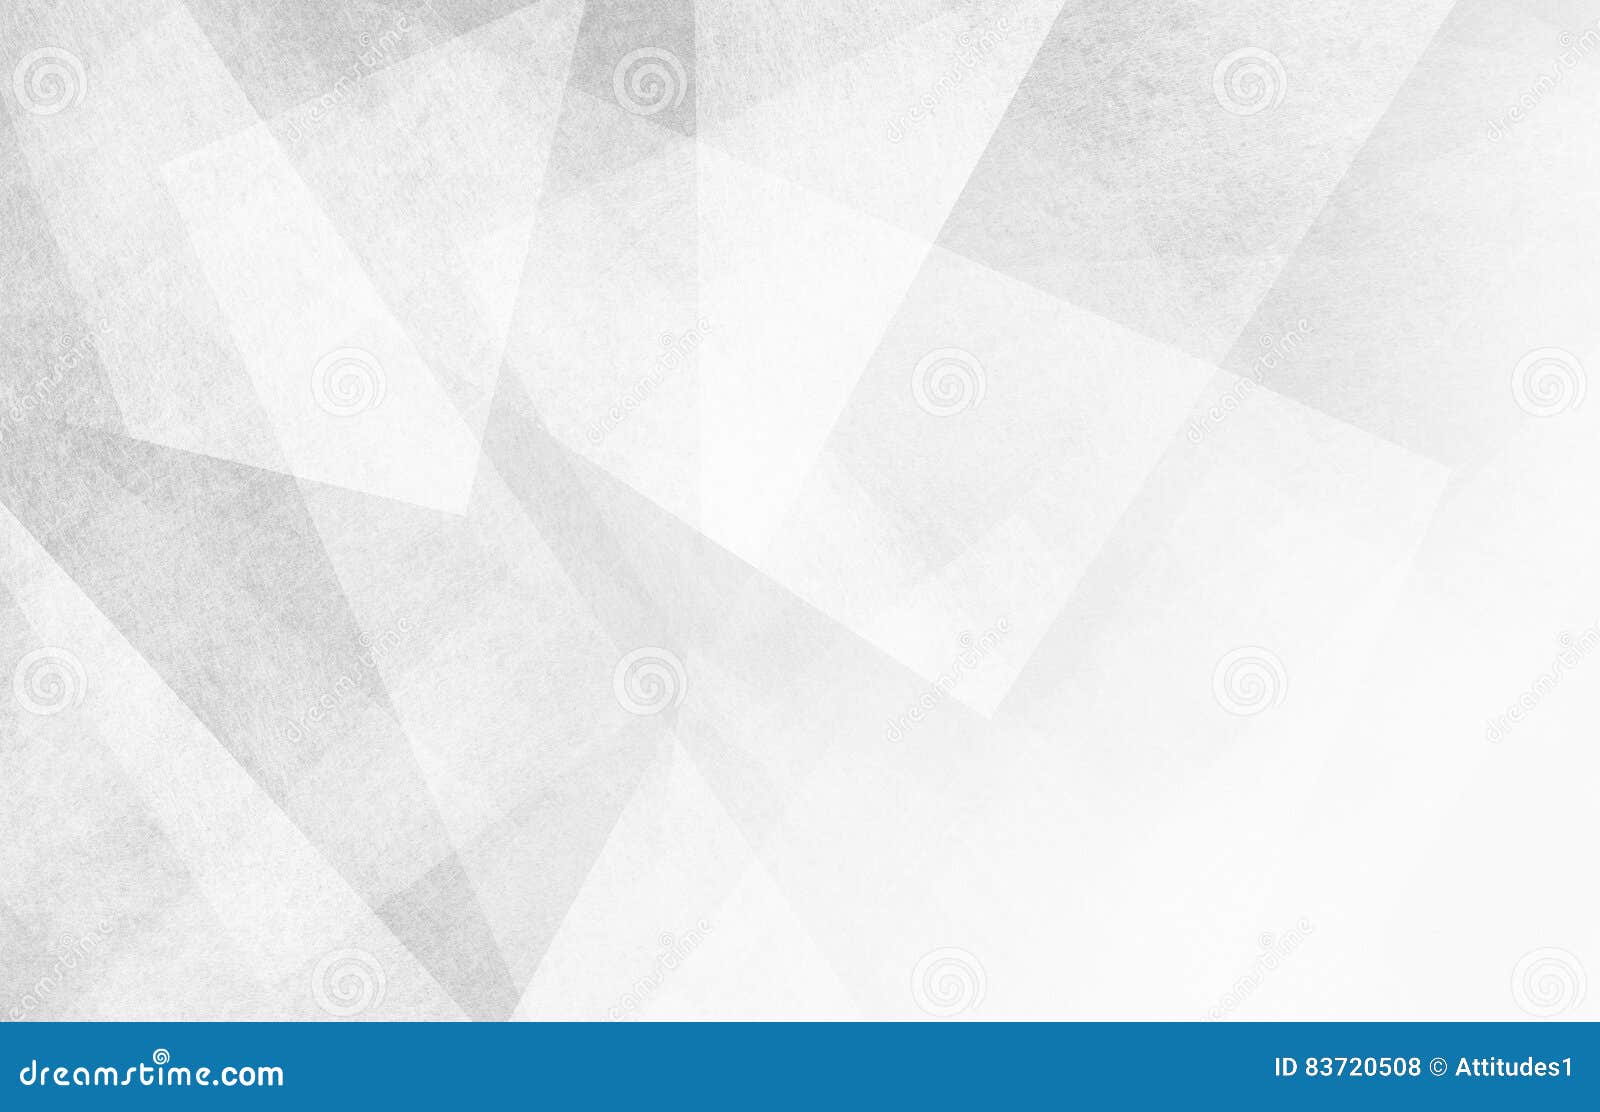 white and gray background with abstract triangle s and angles